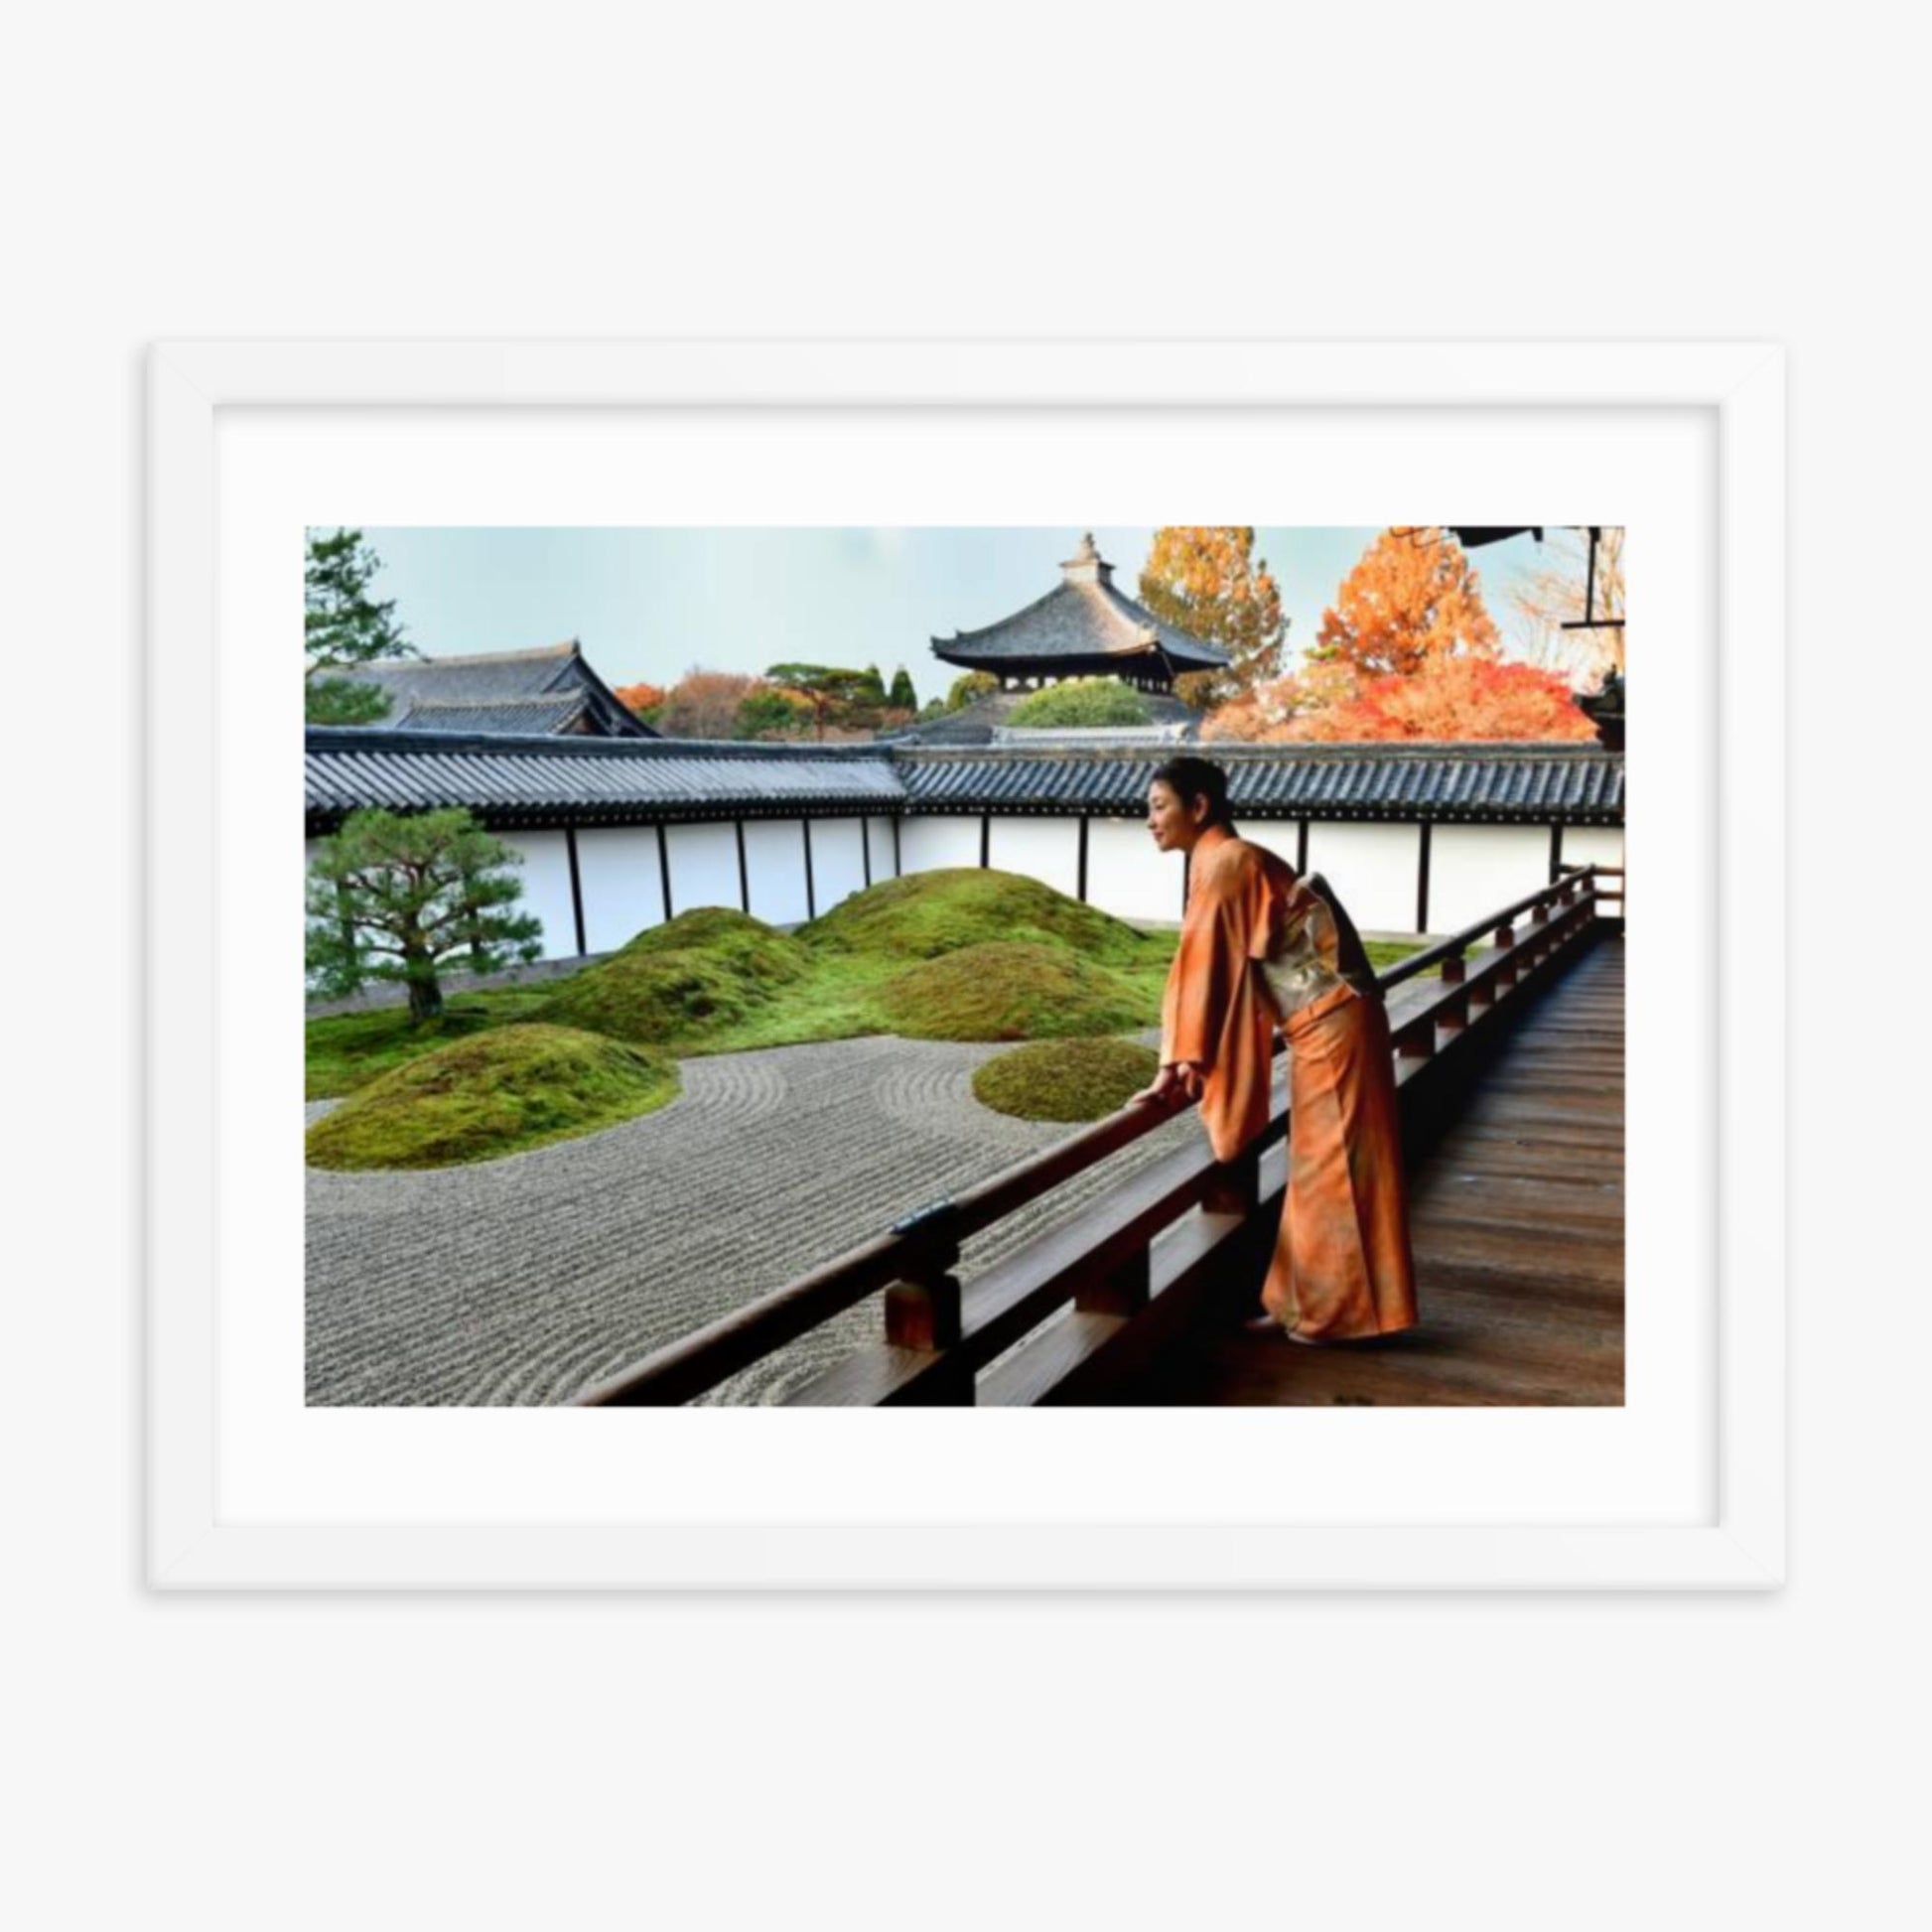 Japanese Woman in Kimono Appreciating Japanese Garden at Tofukuji, Kyoto 18x24 in Poster With White Frame